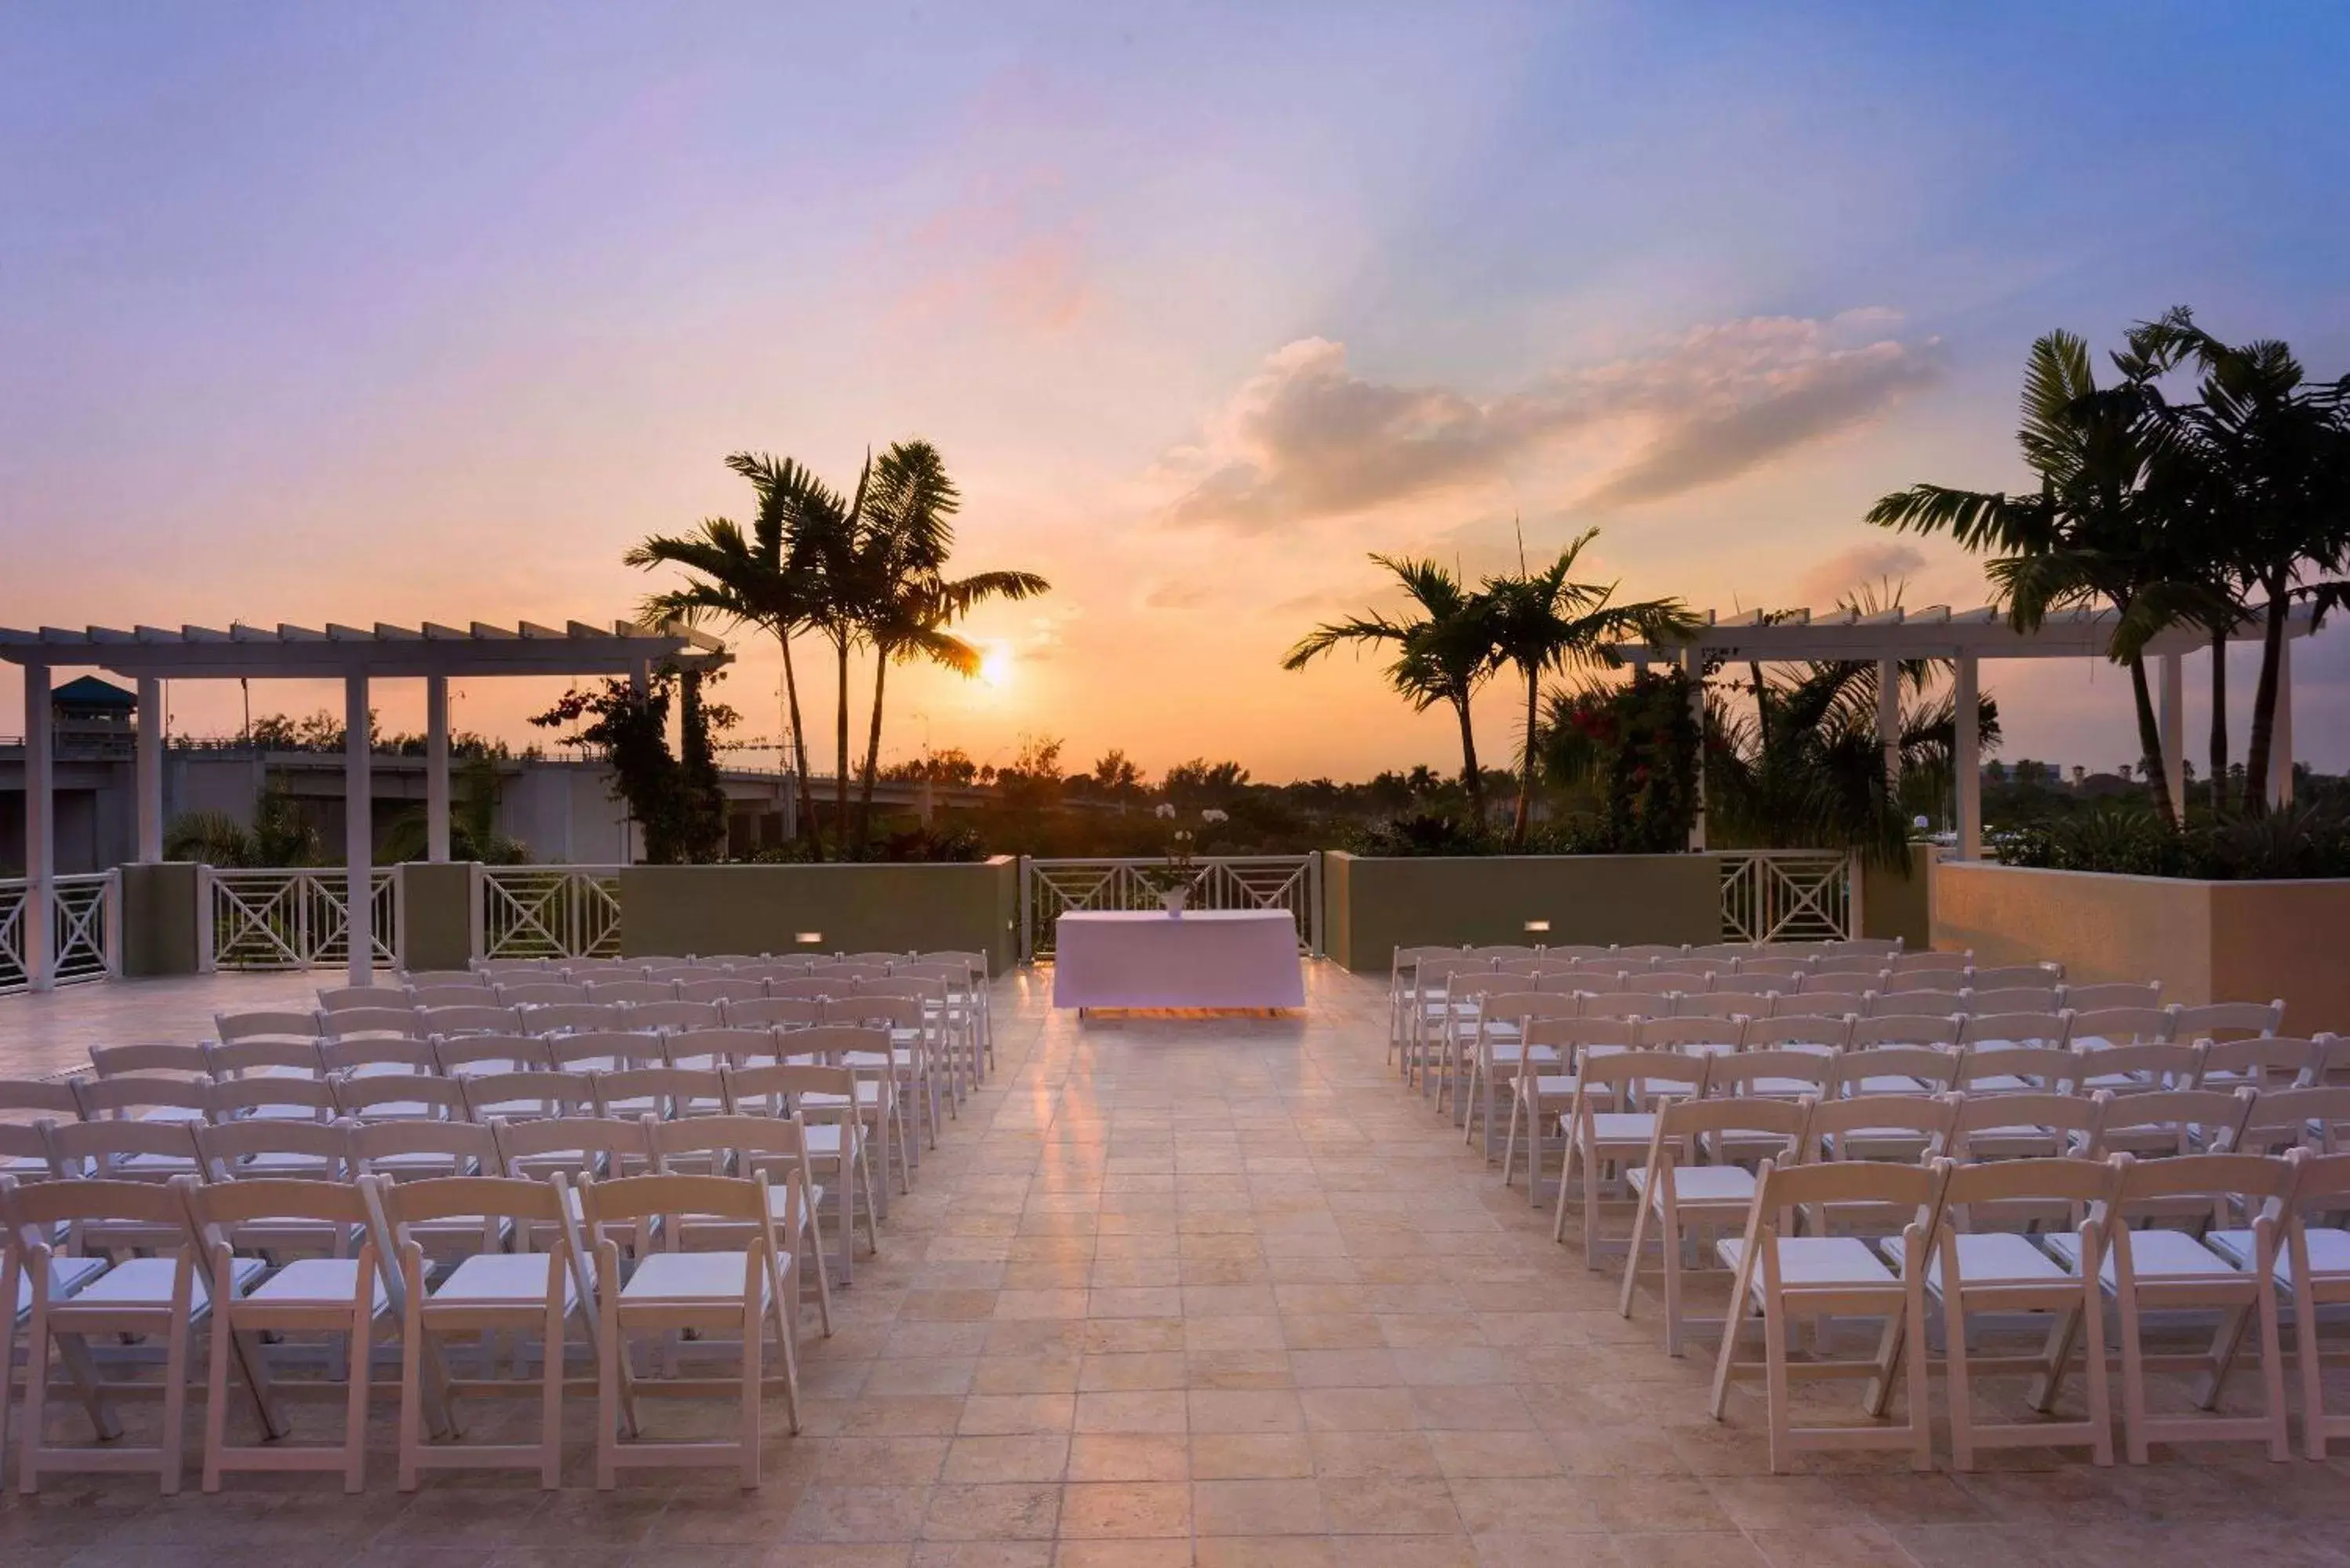 Banquet/Function facilities, Banquet Facilities in Wyndham Grand Jupiter at Harbourside Place